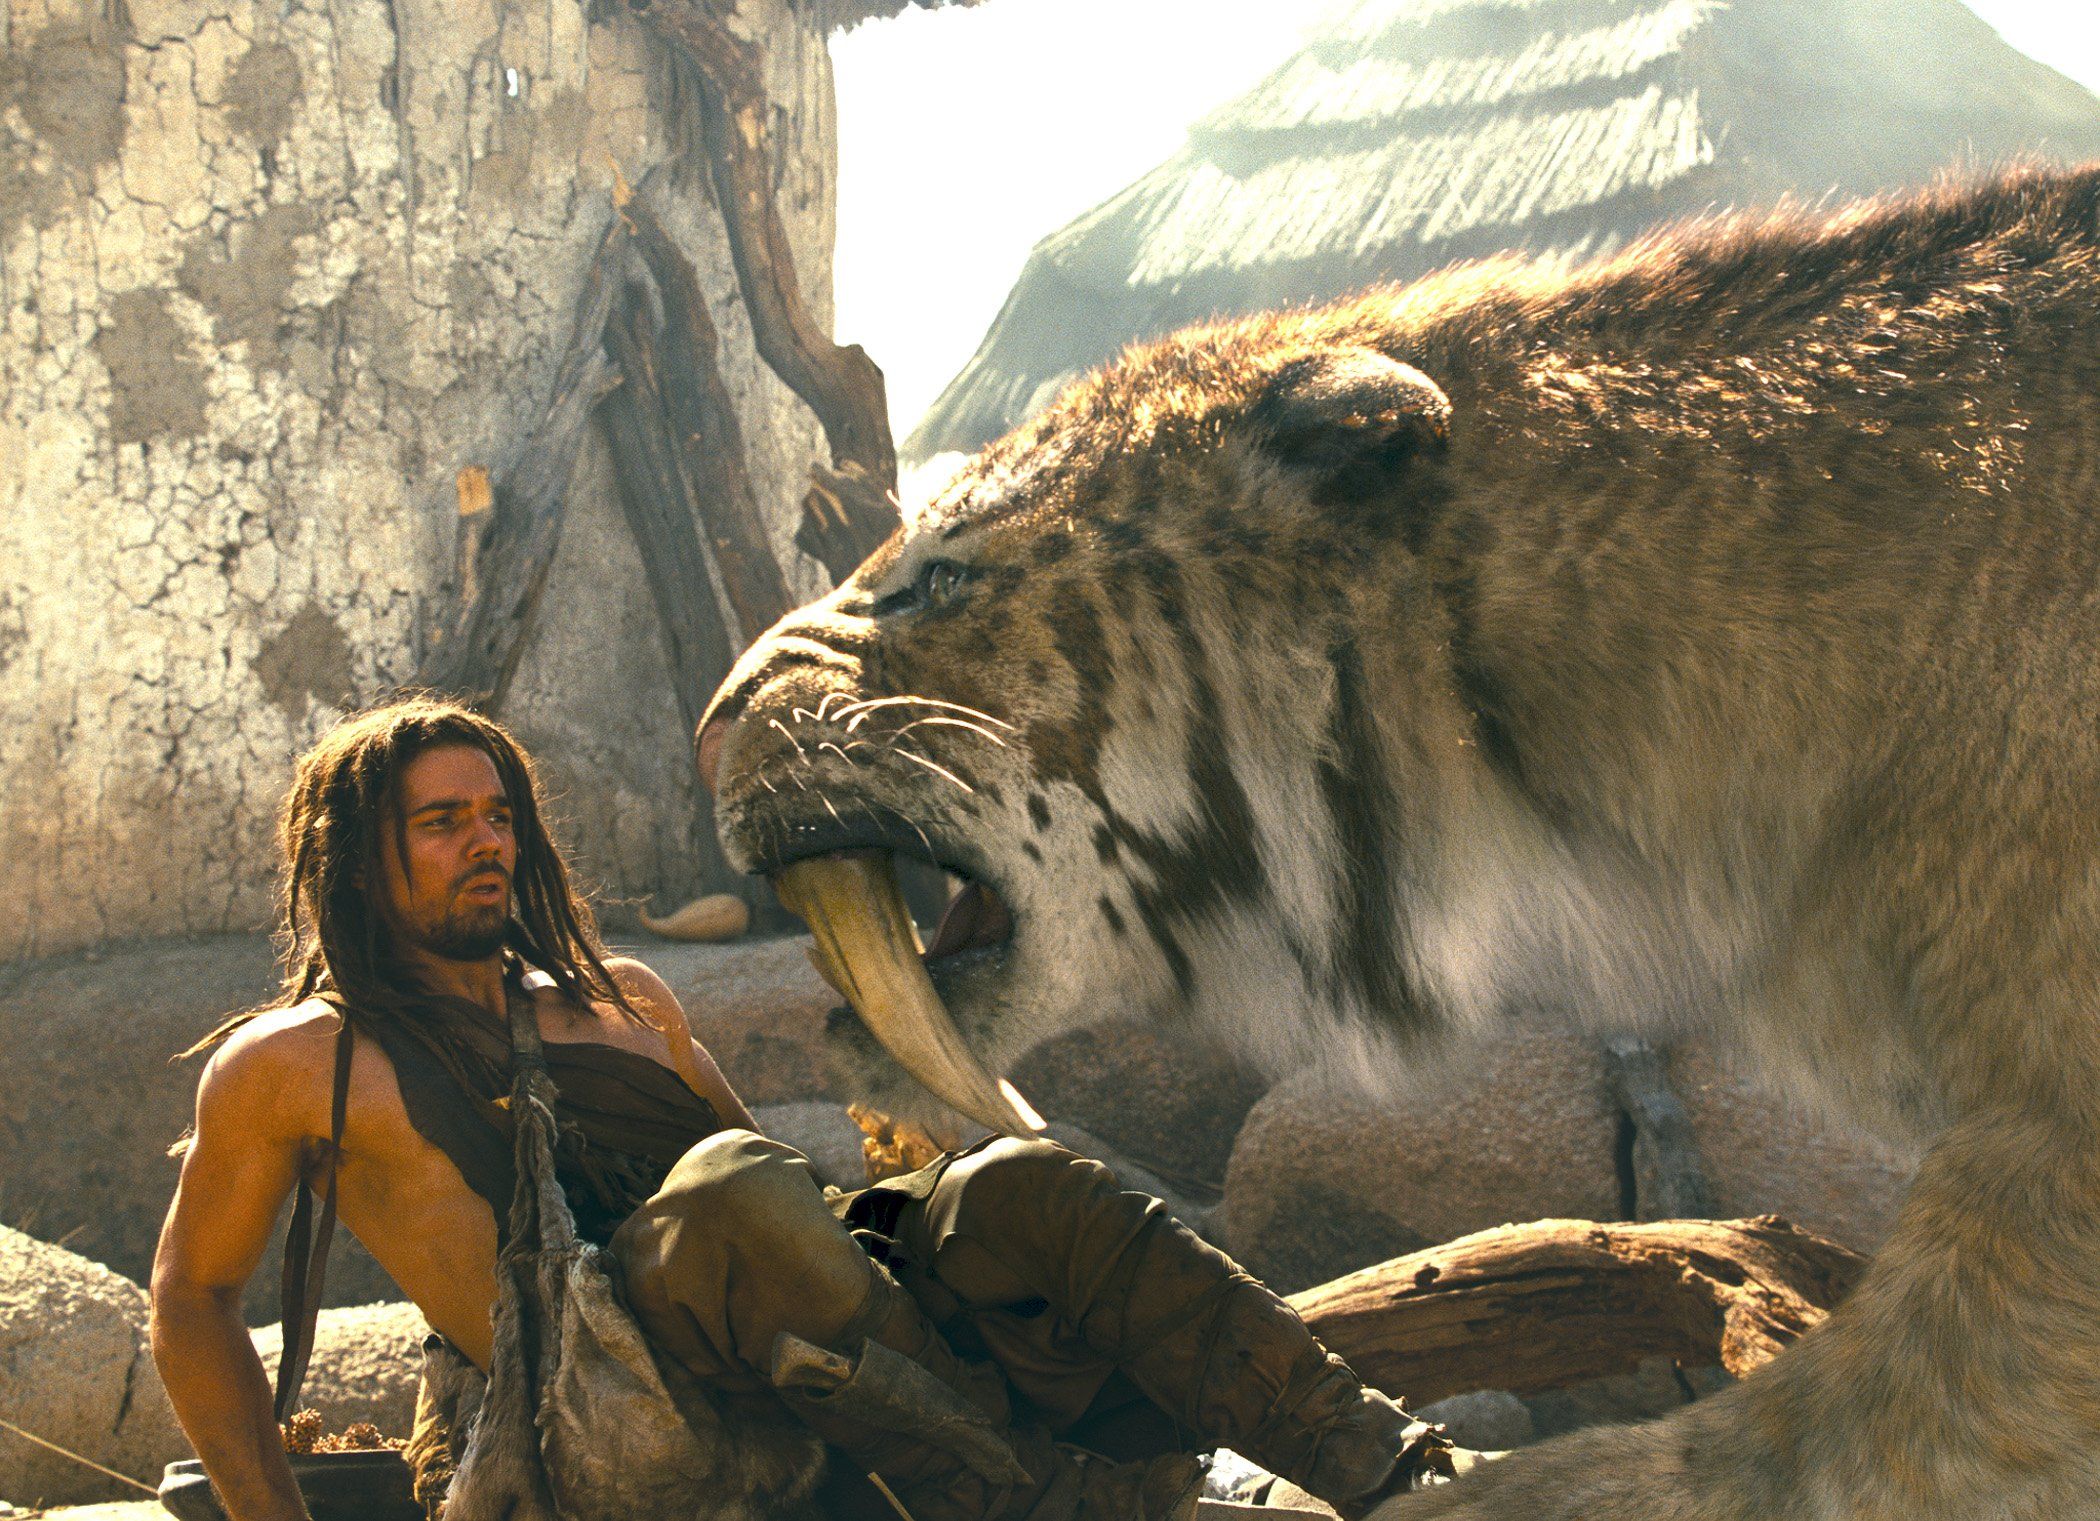 saber toothed tiger, movie, 10 000 bc